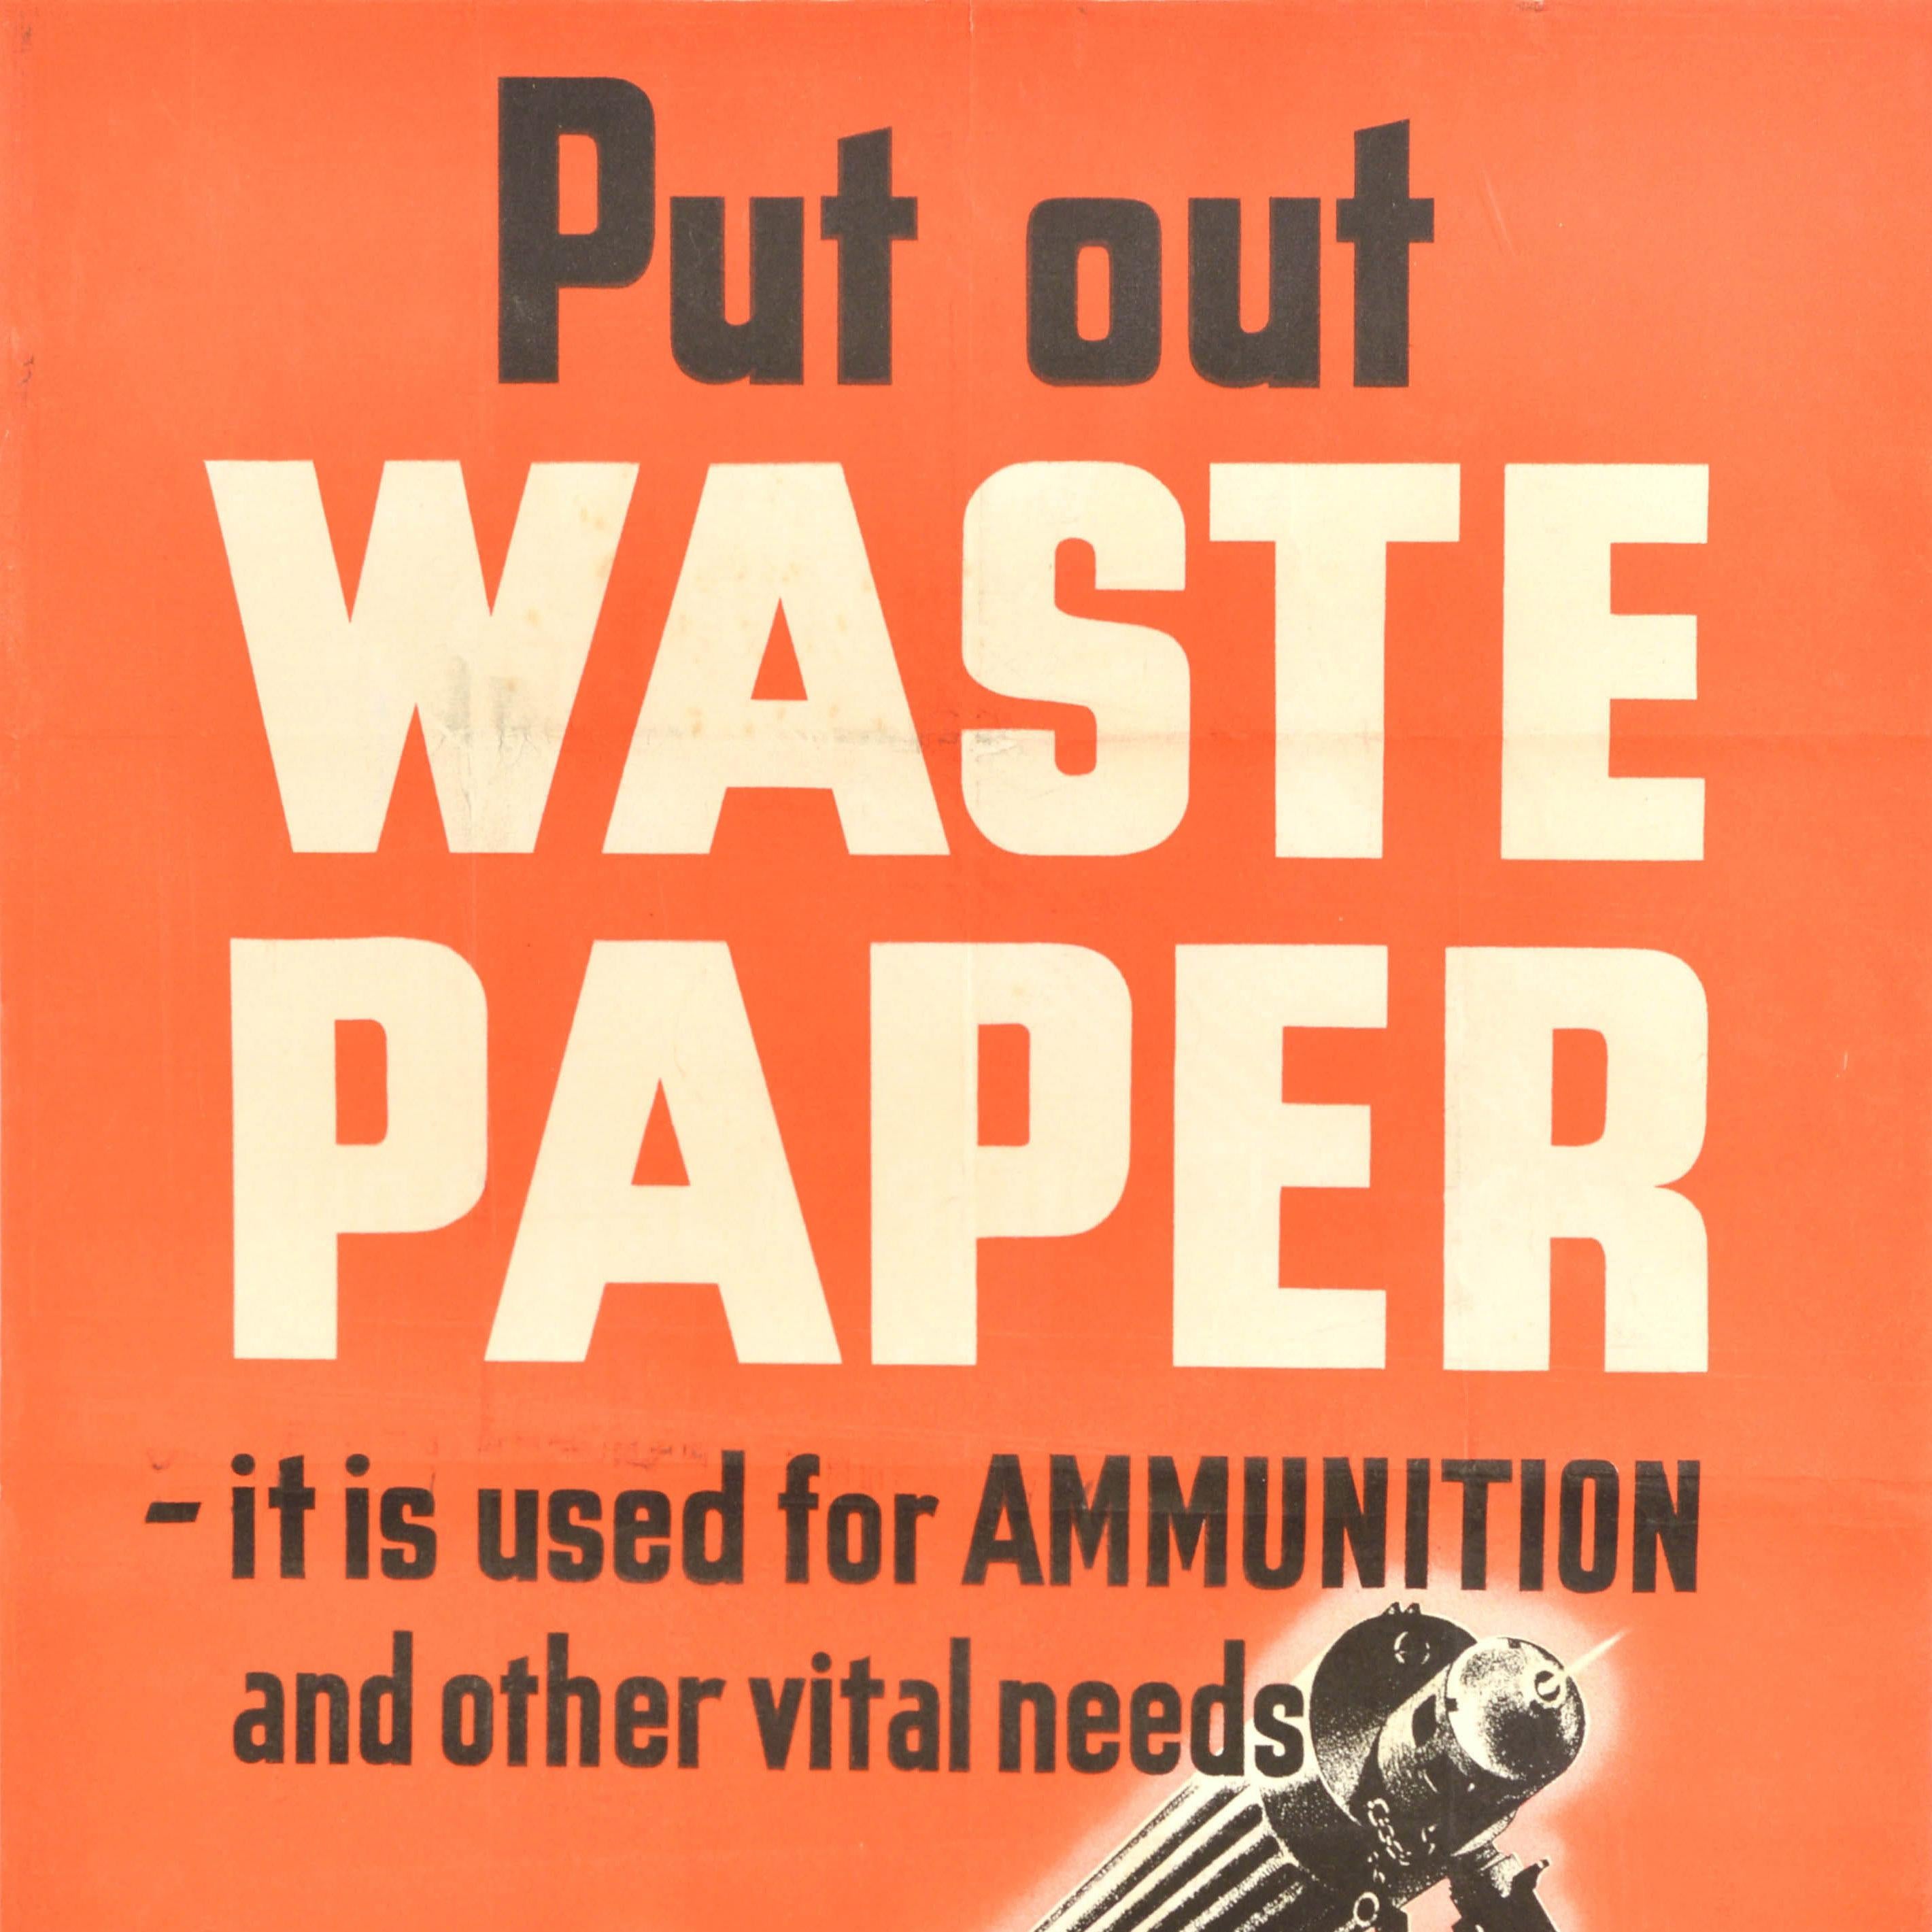 ww2 recycling posters